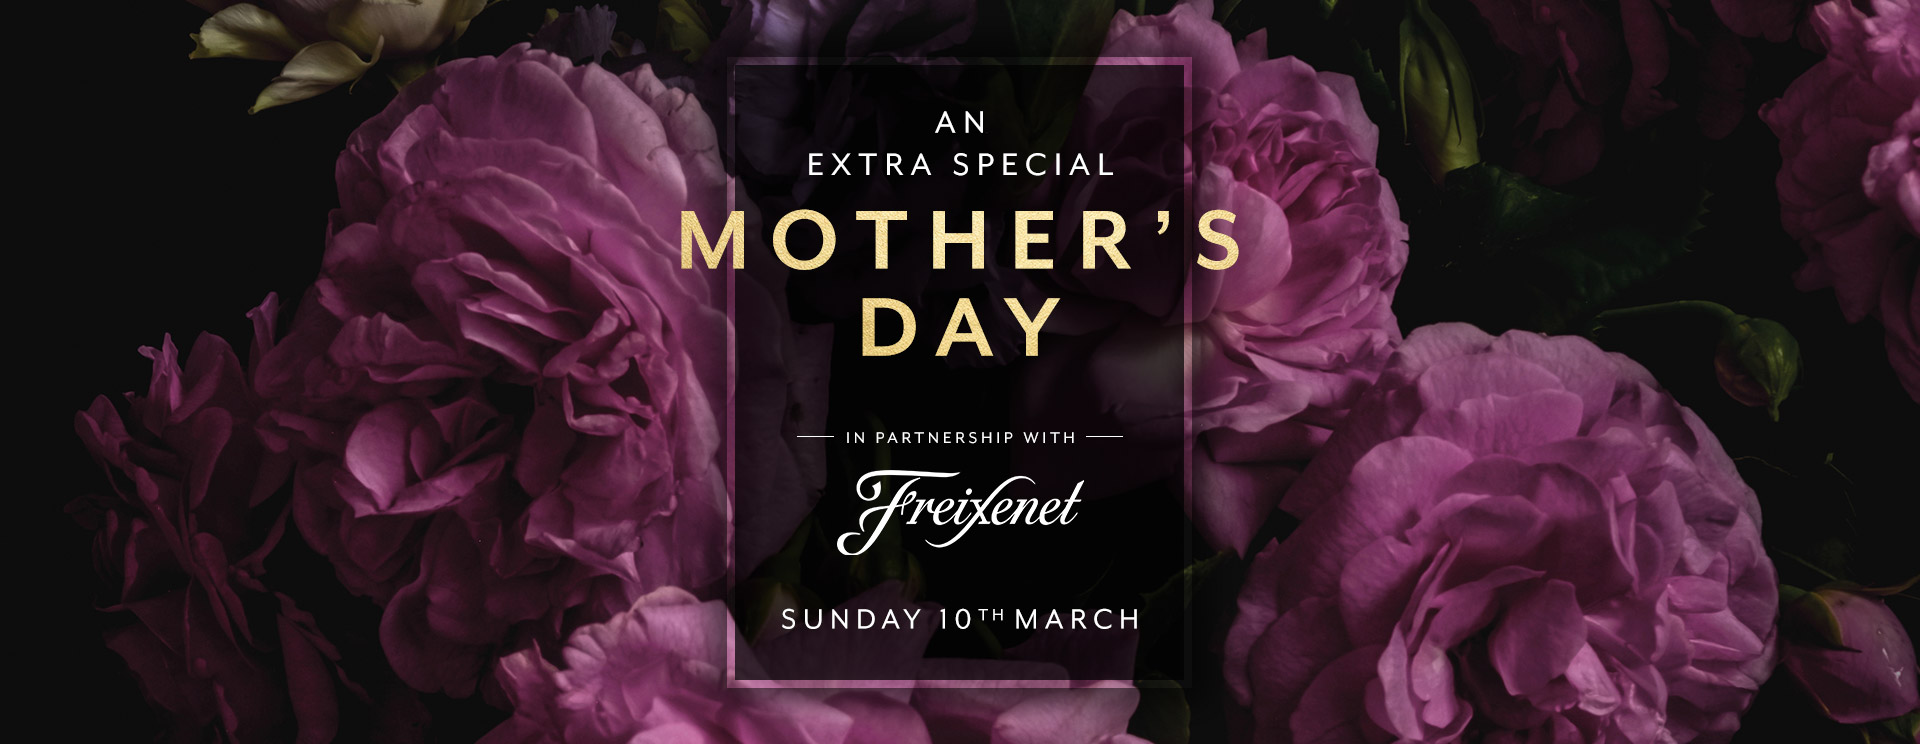 Mother’s Day menu/meal in Cheltenham